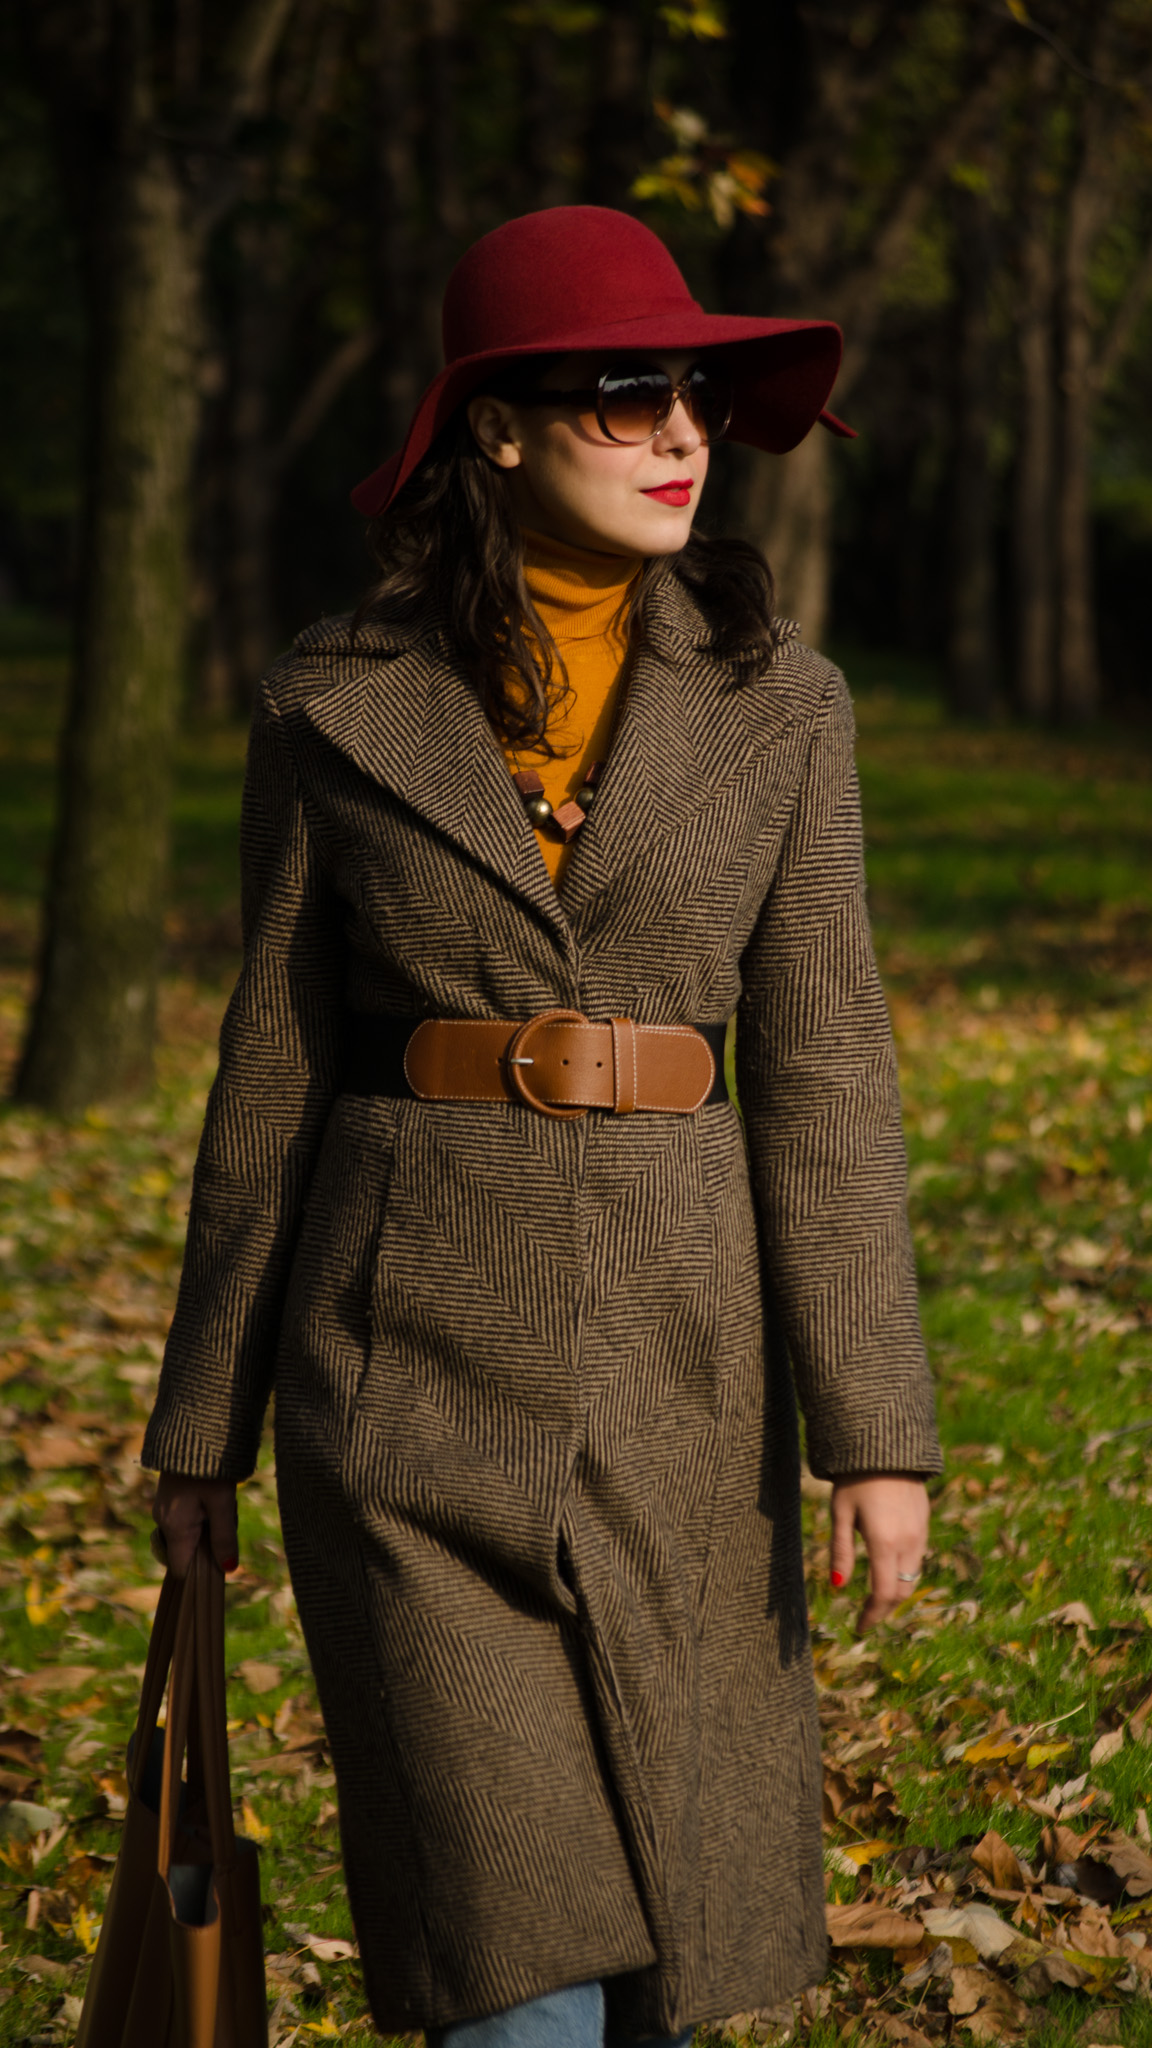 fall essential wardrobe items burgundy hat turtleneck sweater mustard brown pattern coat over-sized bag belt shoes heels autumn scenery leaves mom jeans H&M thrifted 